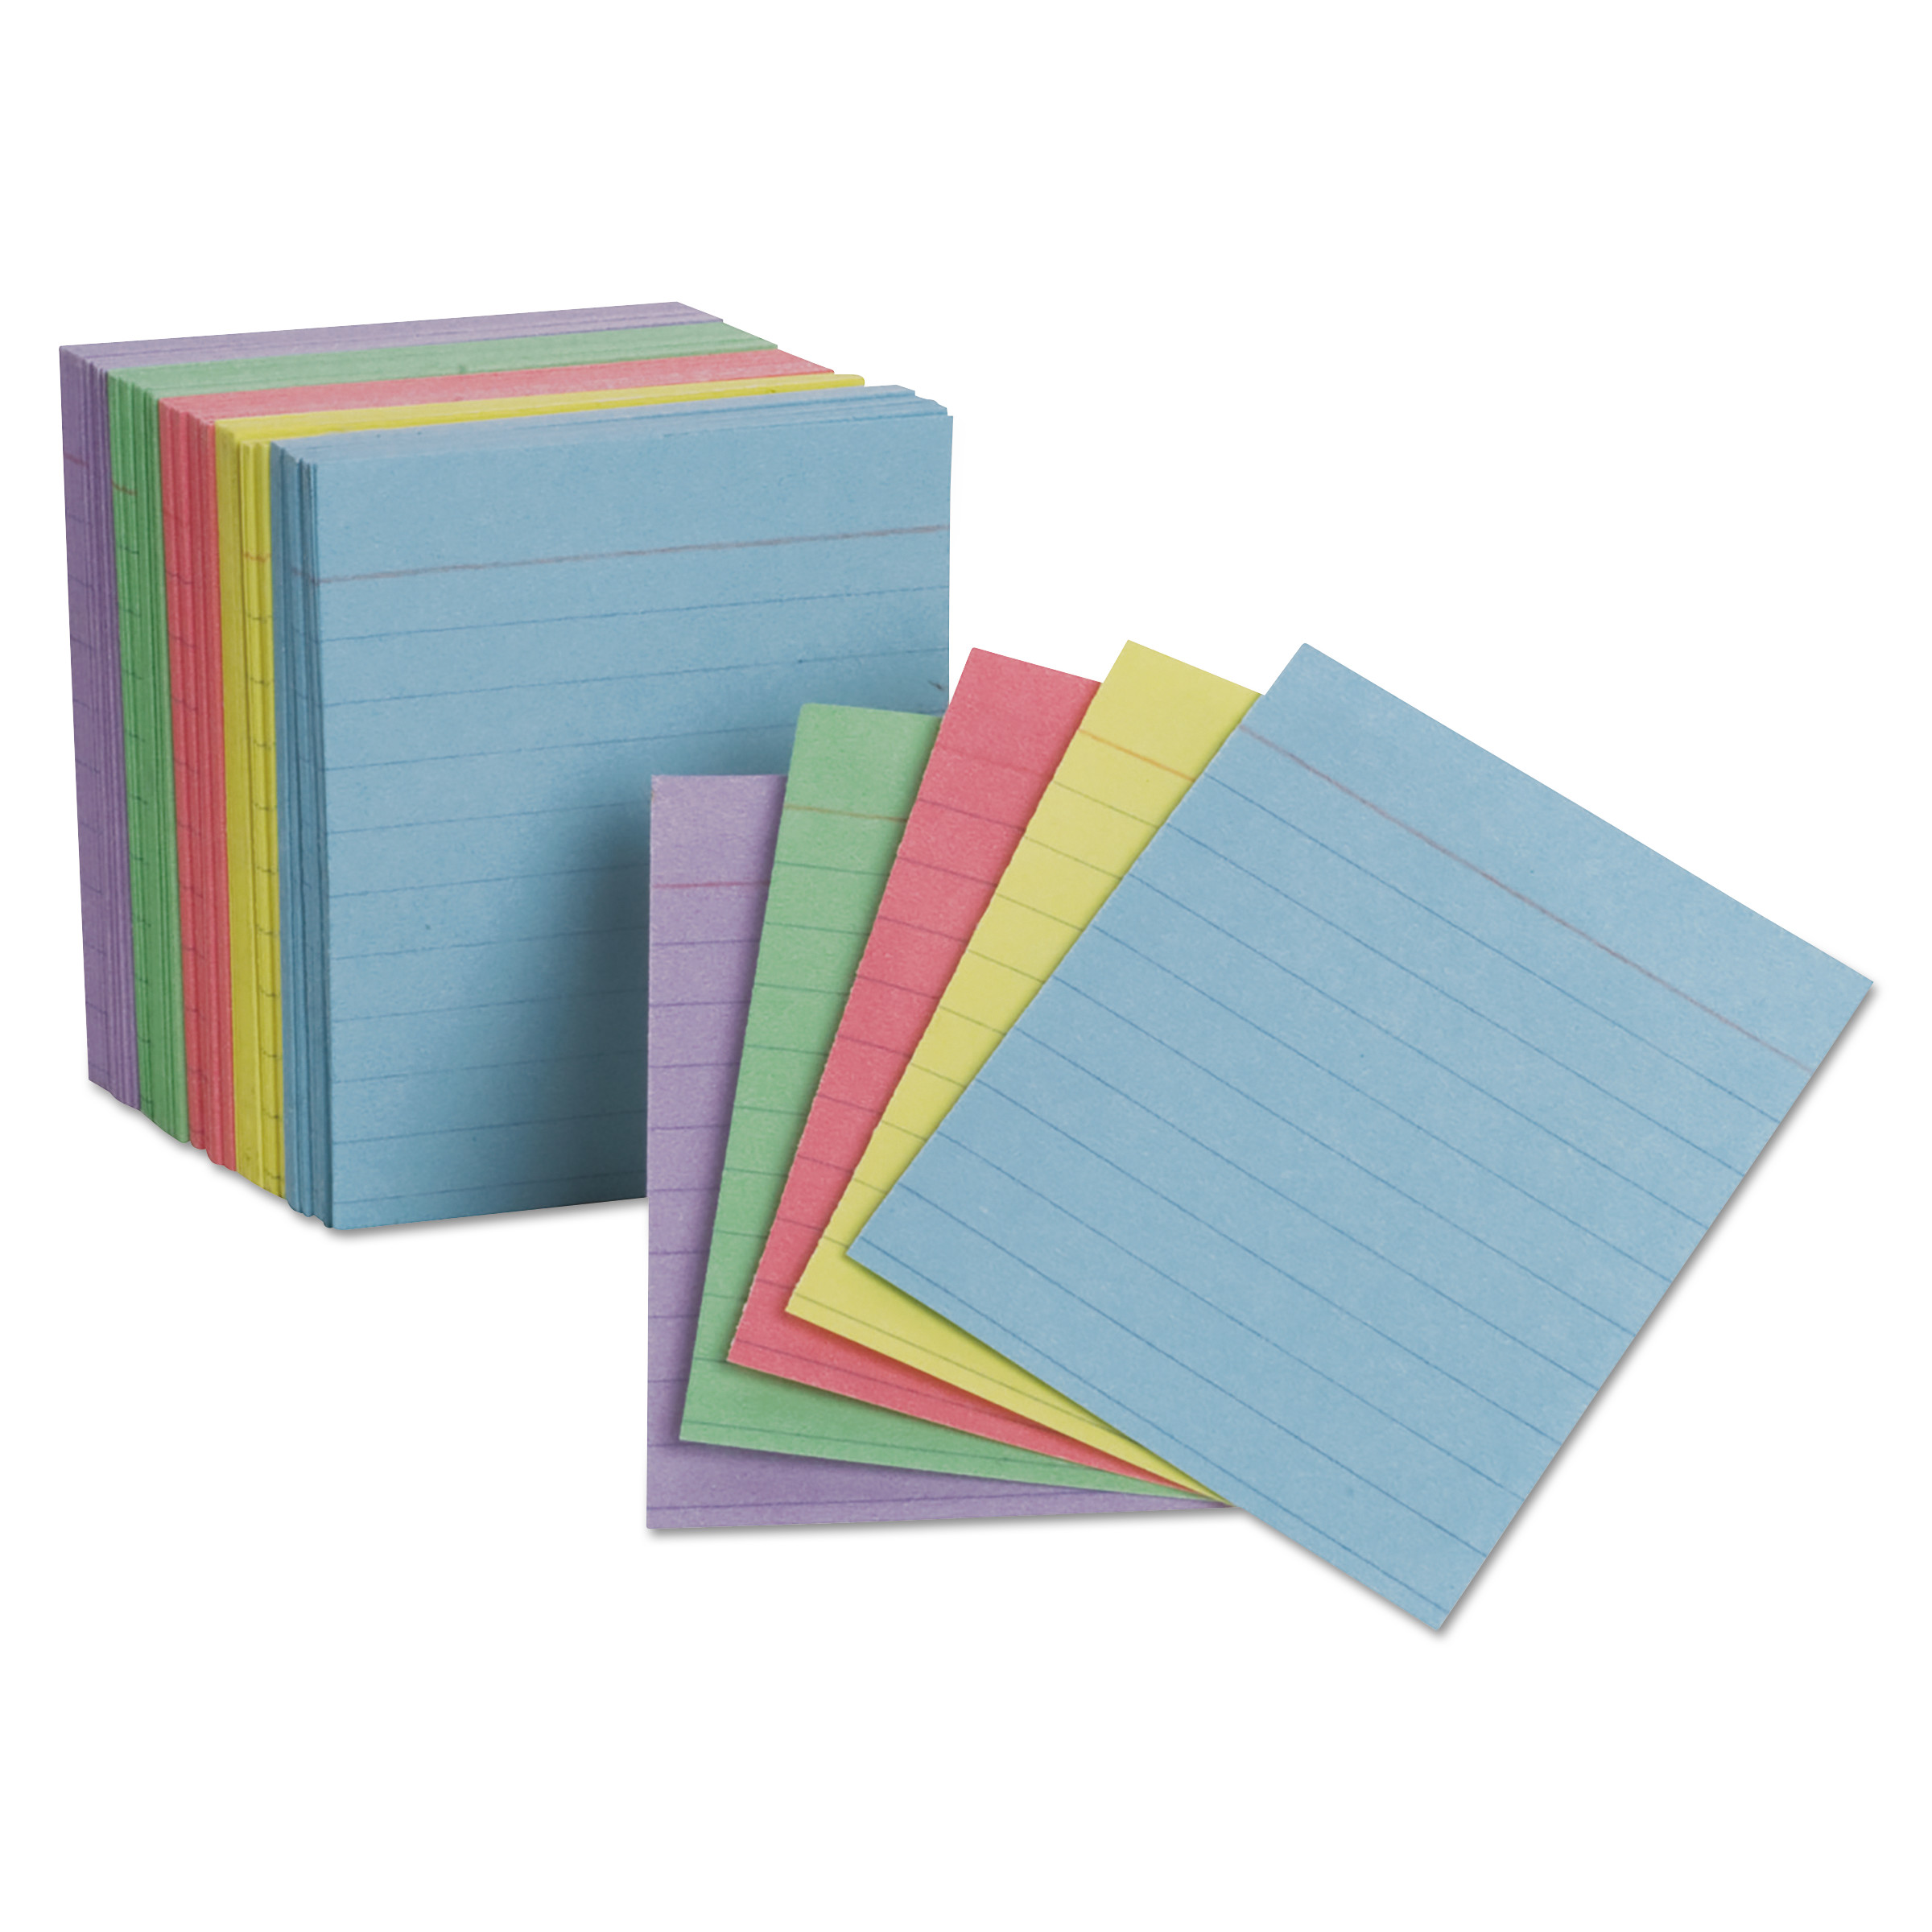  Oxford 10010EE Ruled Mini Index Cards, 3 x 2 1/2, Assorted, 200/Pack (PFX10010) 